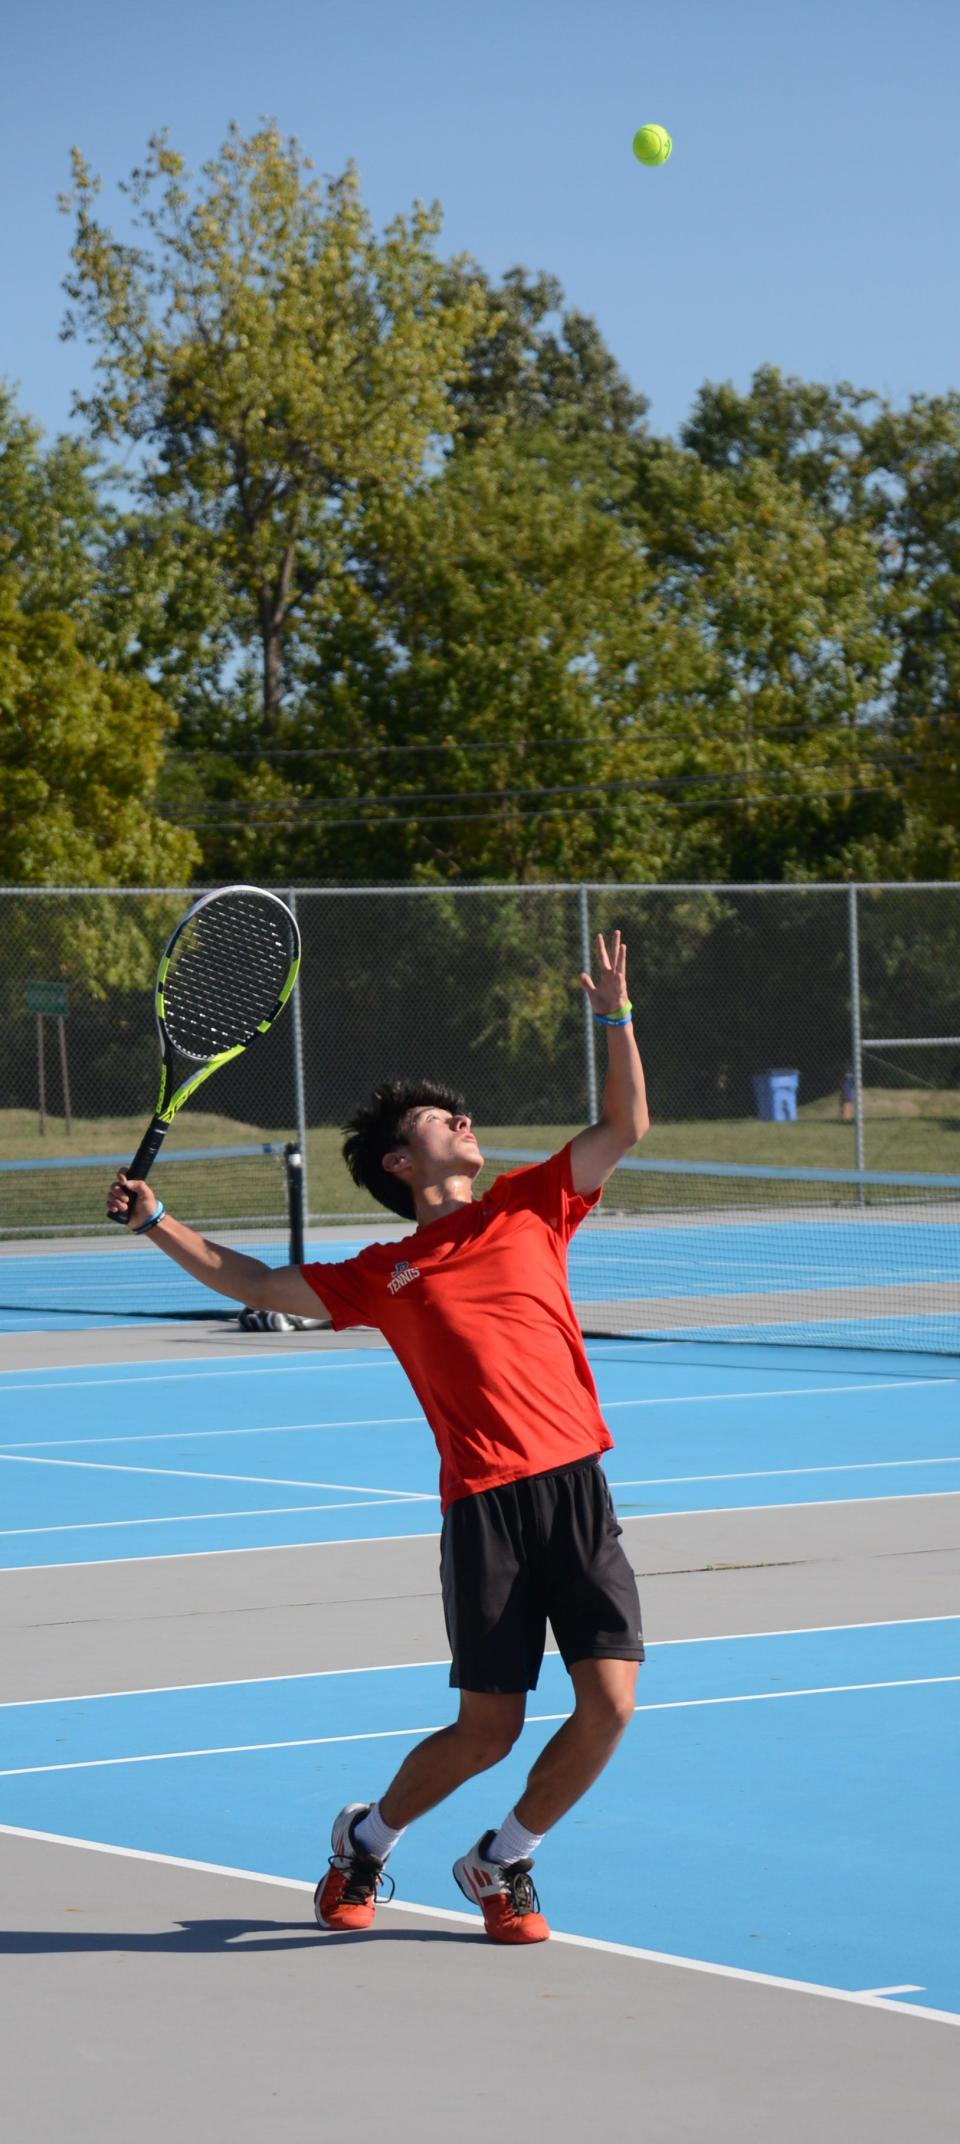 Bedford’s Noah Kaplan serves during a match earlier this season. He repeated as Regional champion at No. 1 singles Thursday.